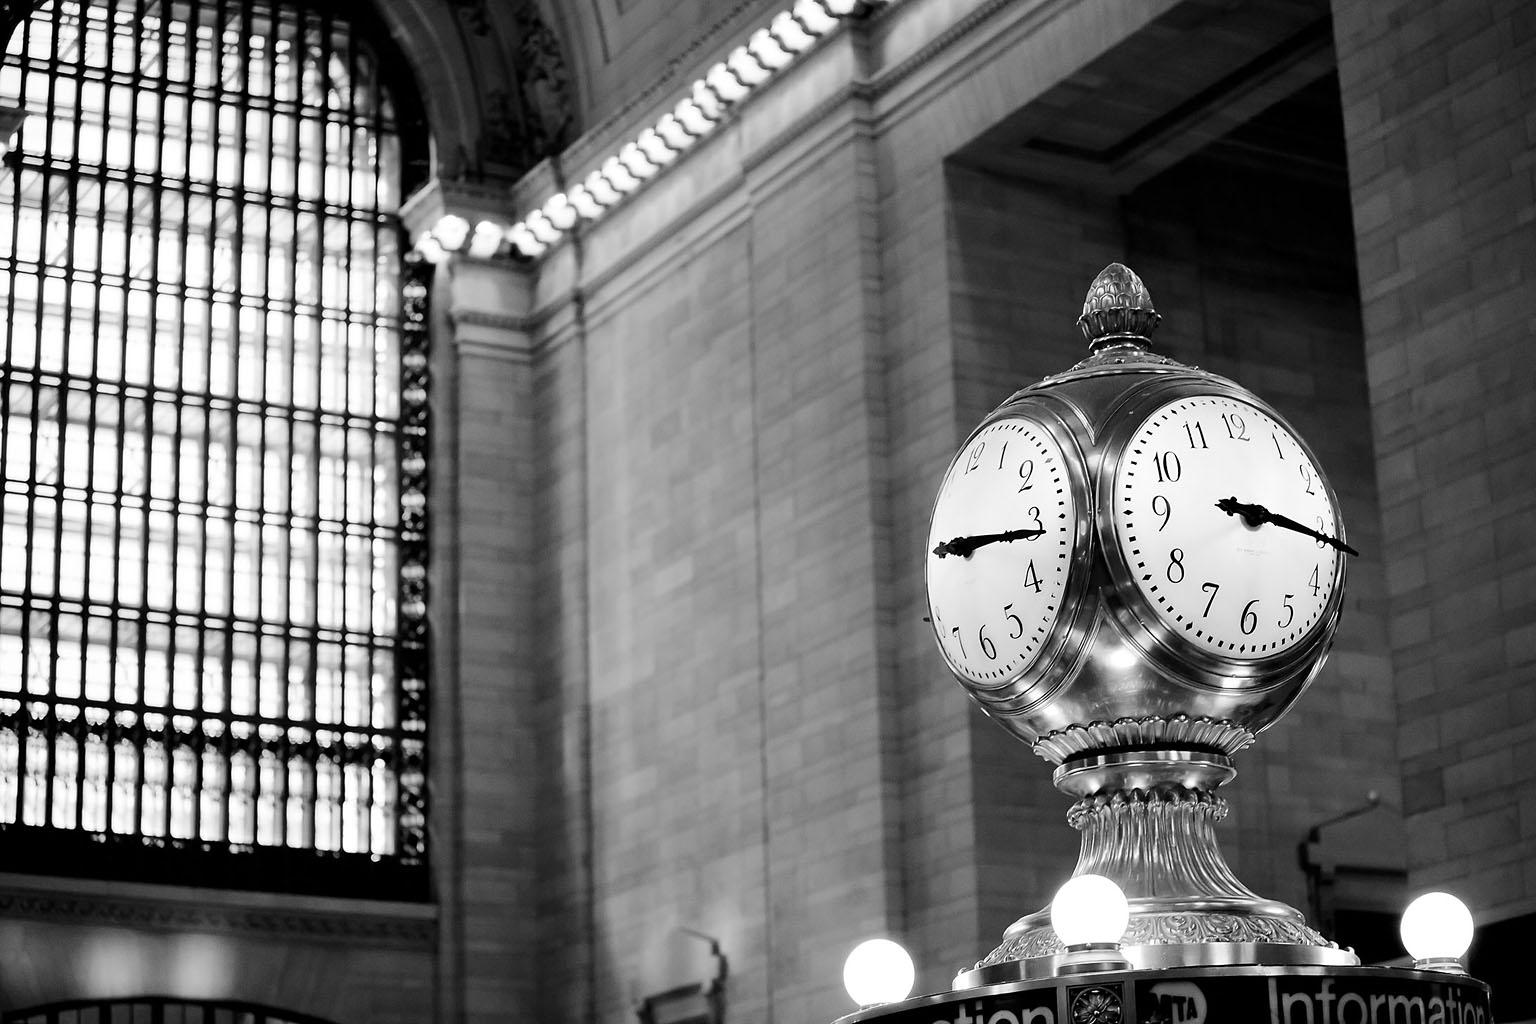 "Grand Central Station", Black and White Urban Photography, Architecture, Clock